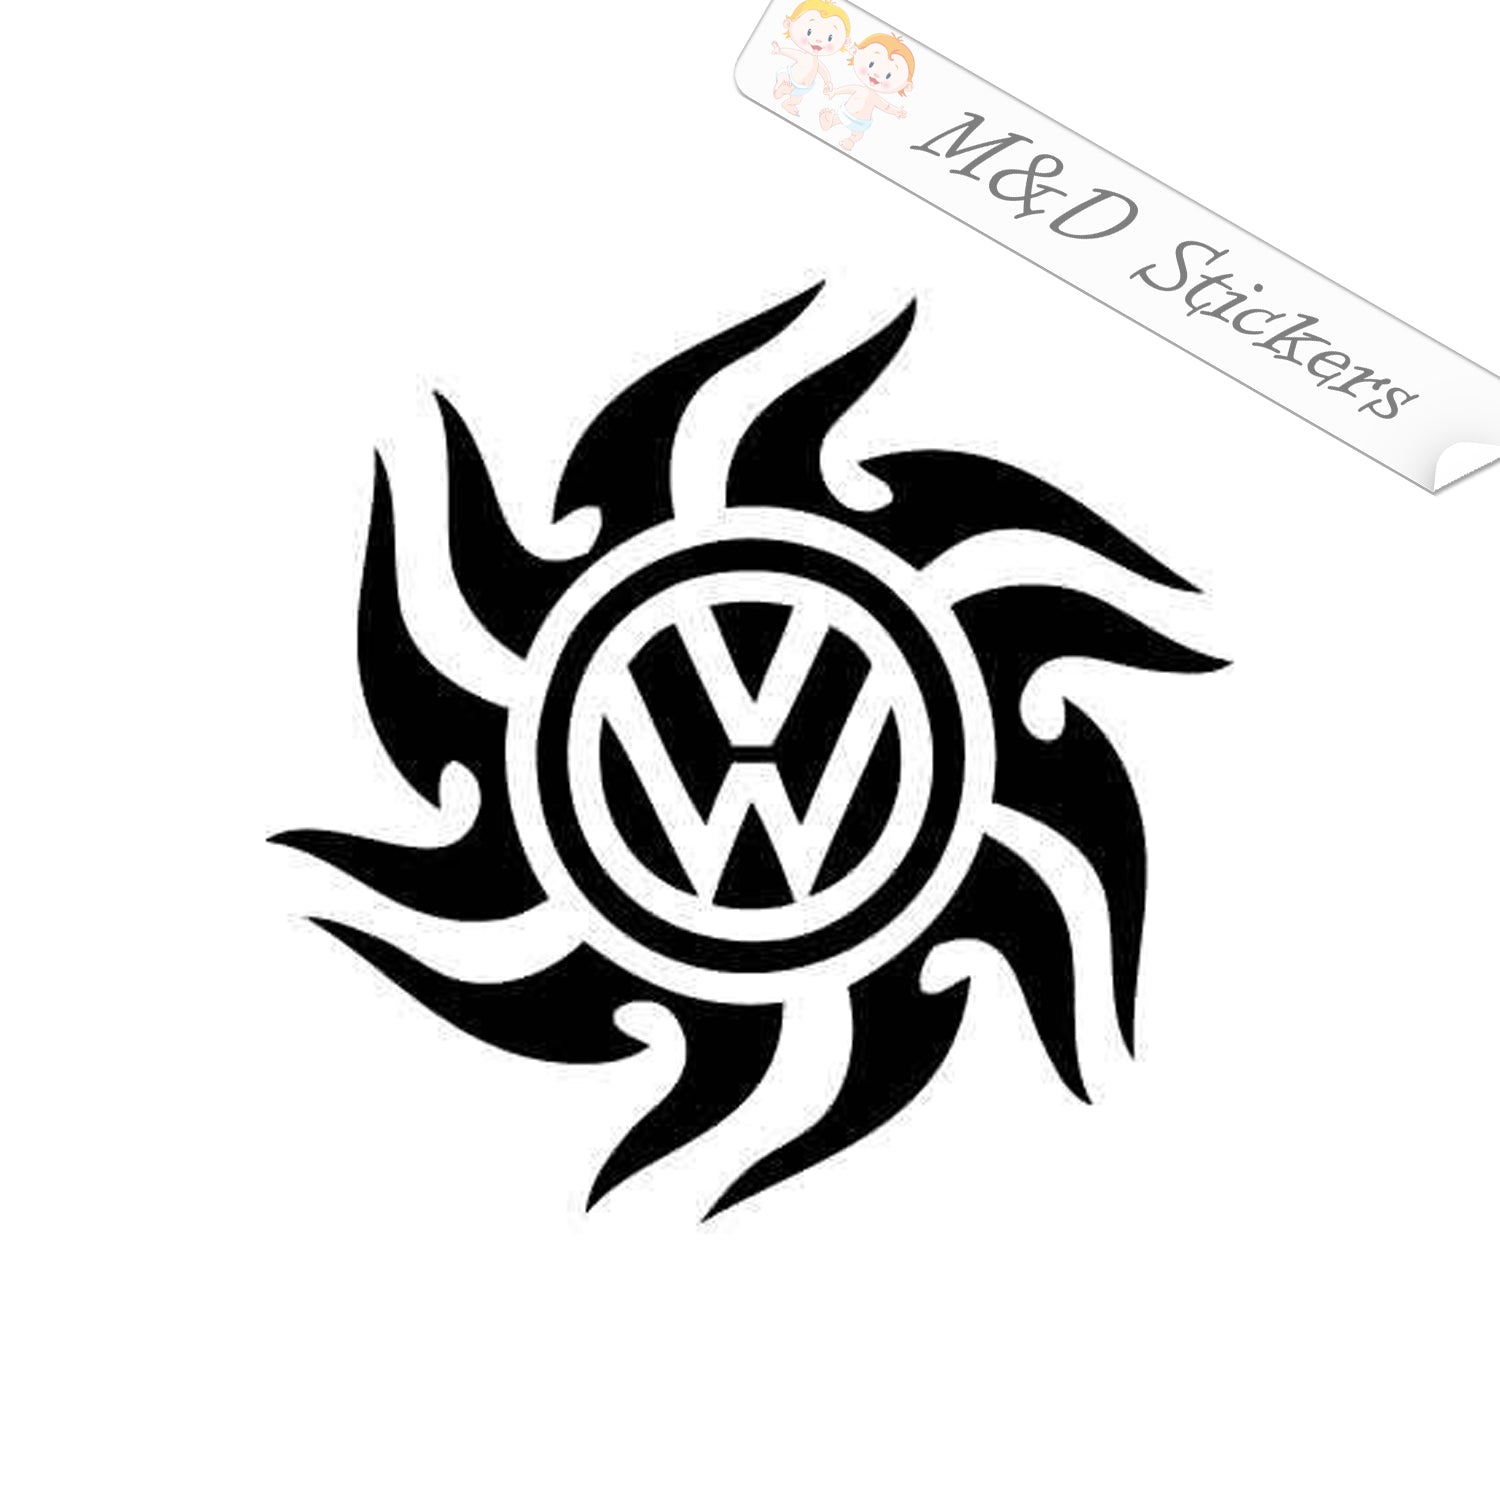 2x Volkswagen Logo Vinyl Decal Sticker Different colors & size for